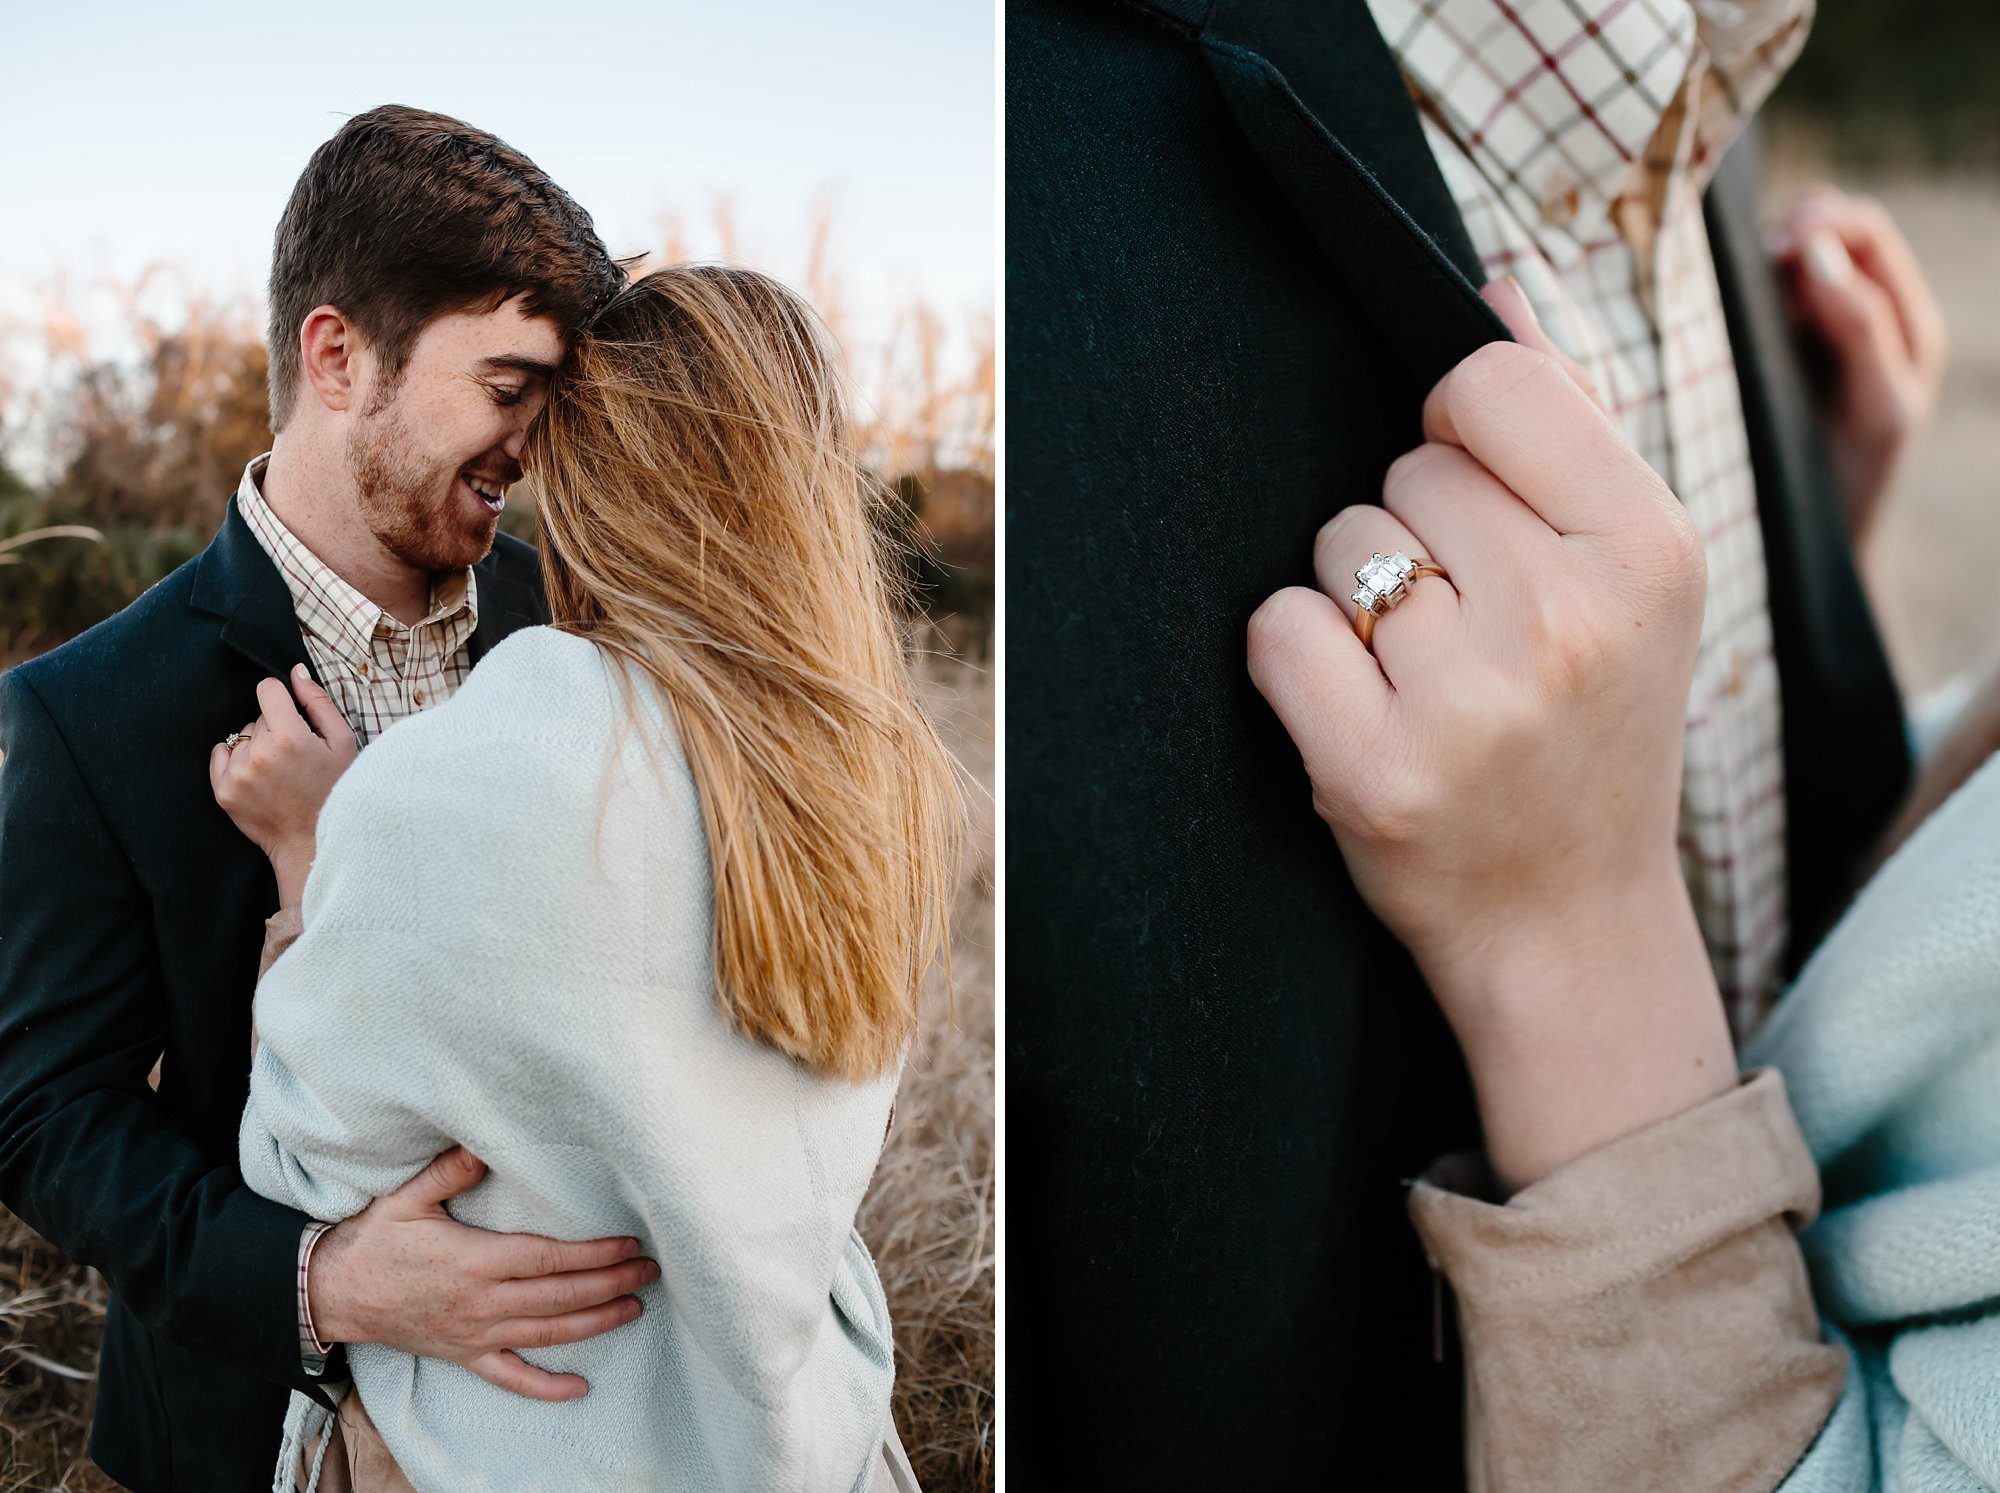 Close up of Megan and Turner's engagement ring while embracing in the cold wind